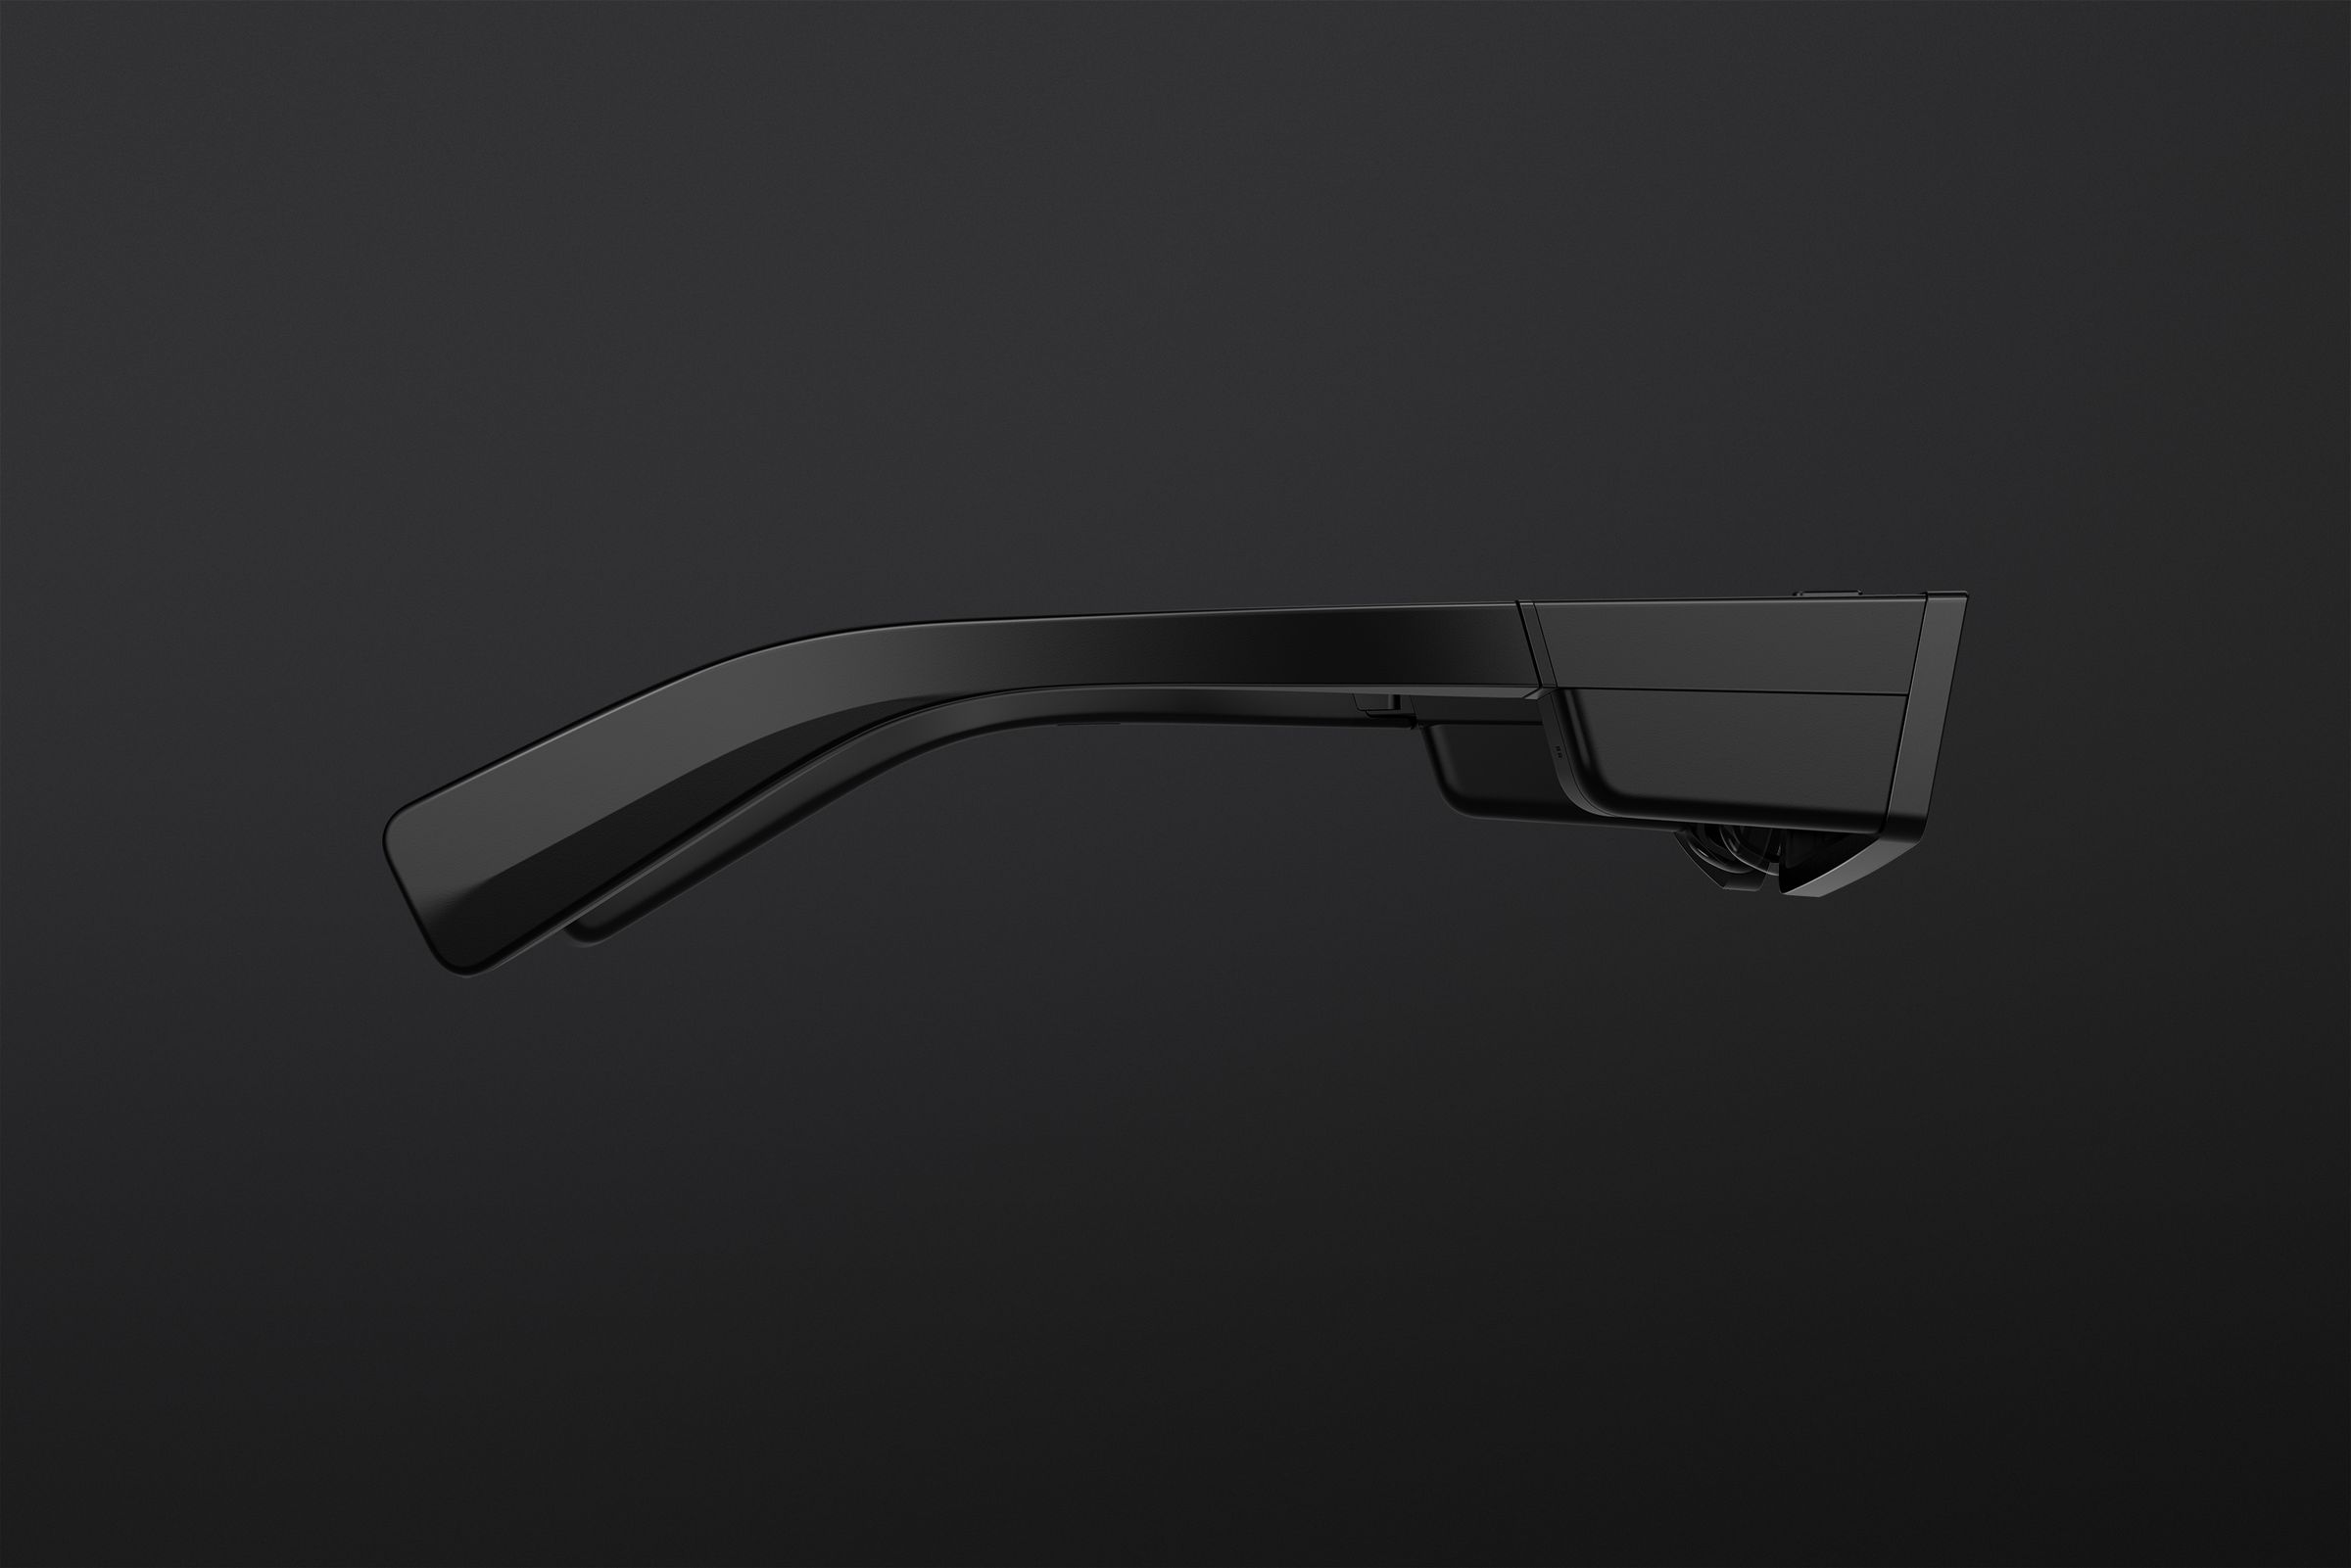 A side view showing the right temple of the glasses. A touchpad beside the lens lets you control the Spectacles.